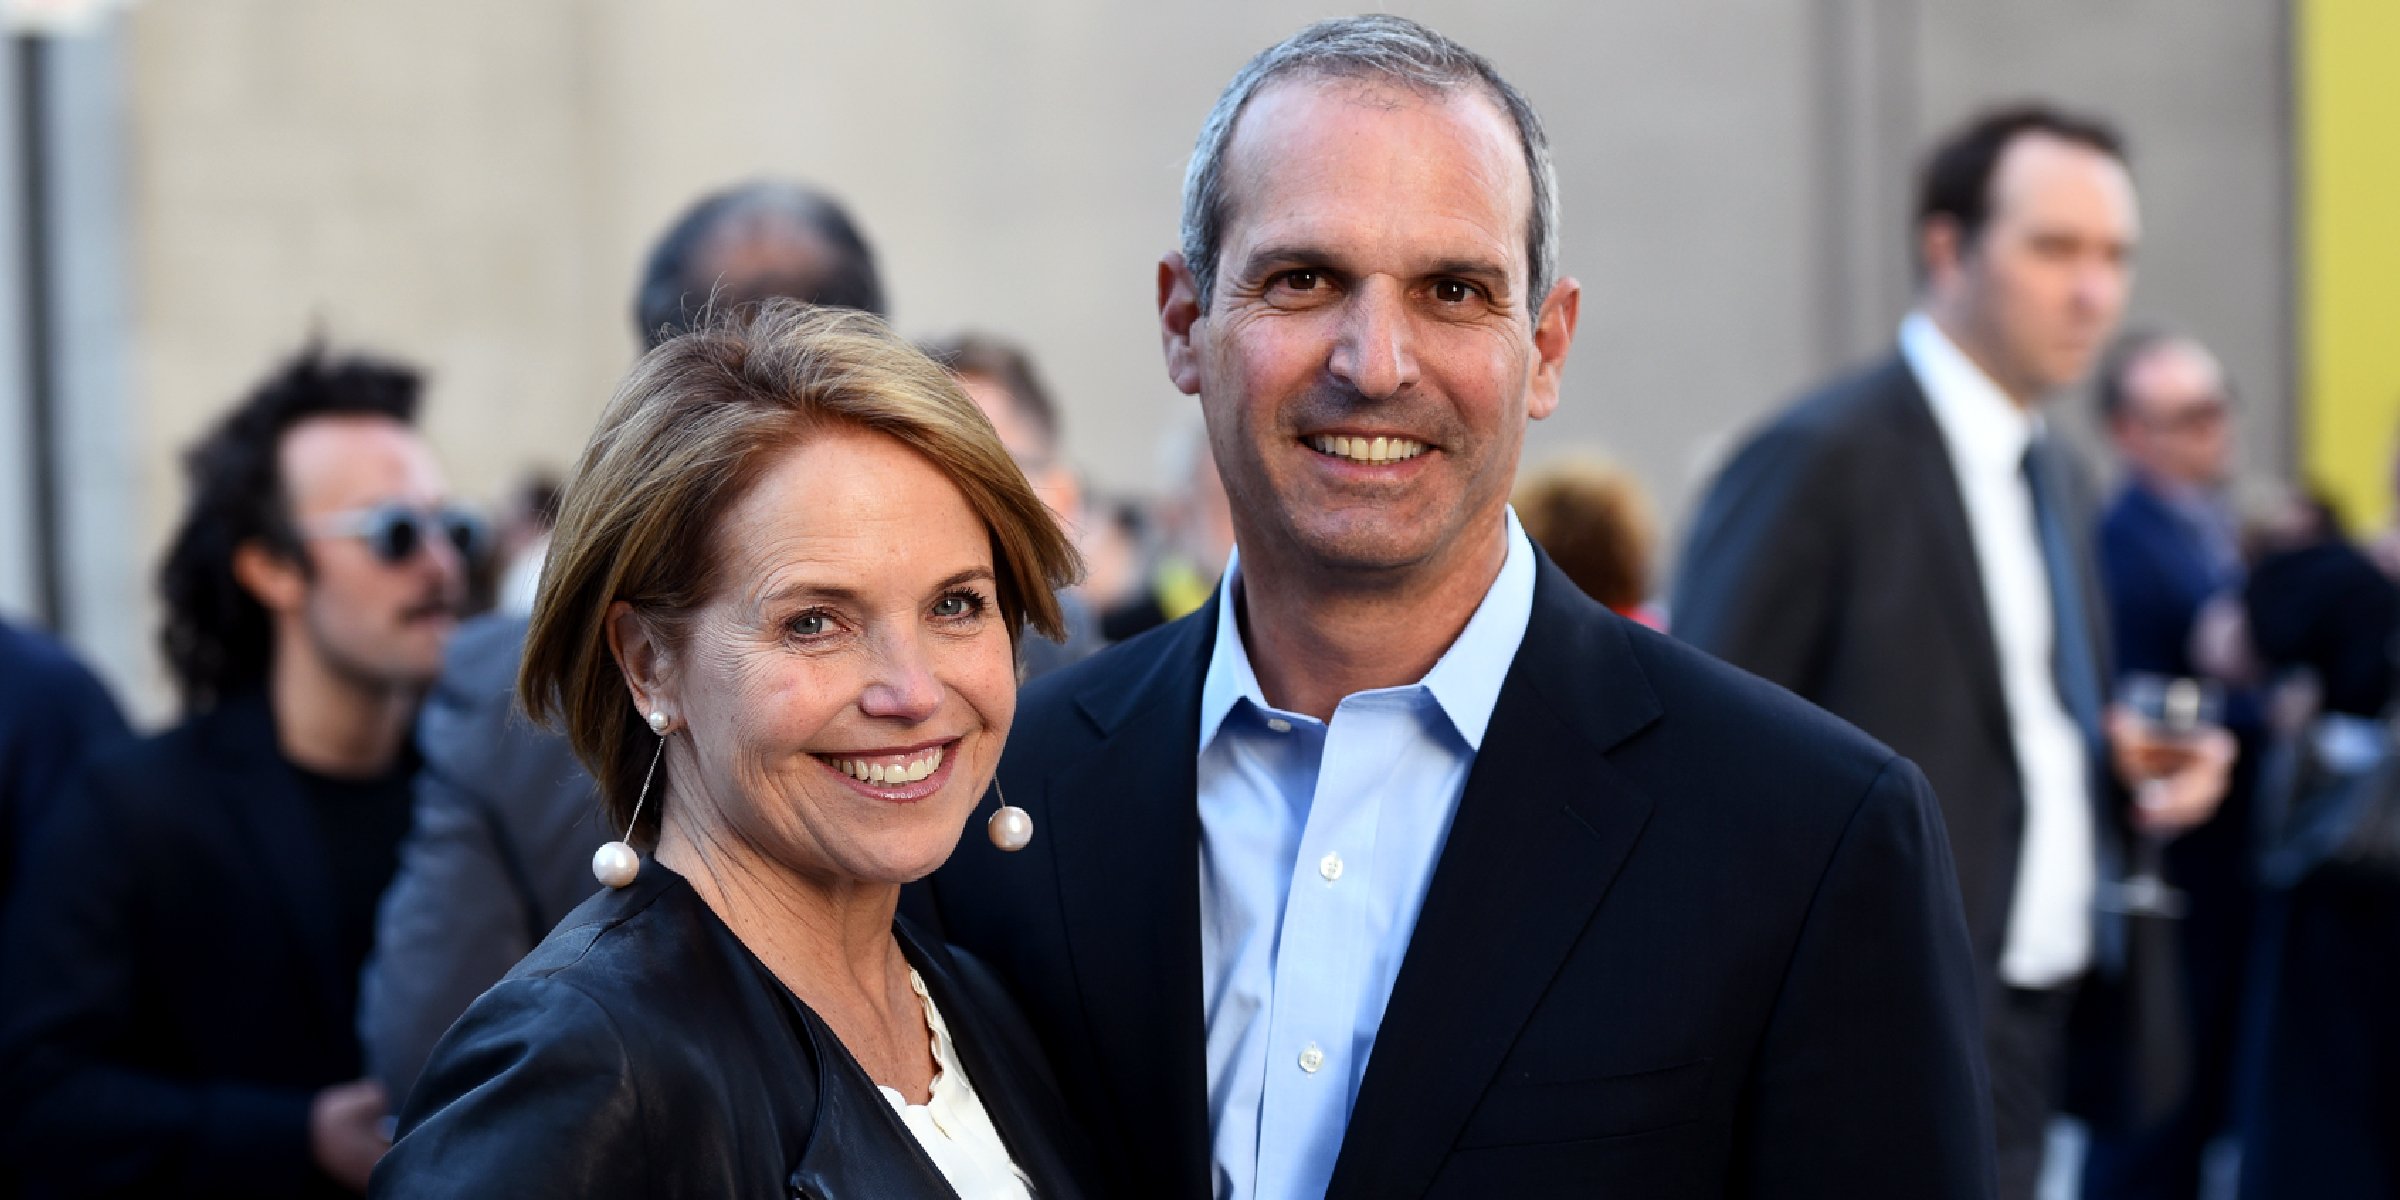 Katie Couric and John Molner | Source: Getty Images